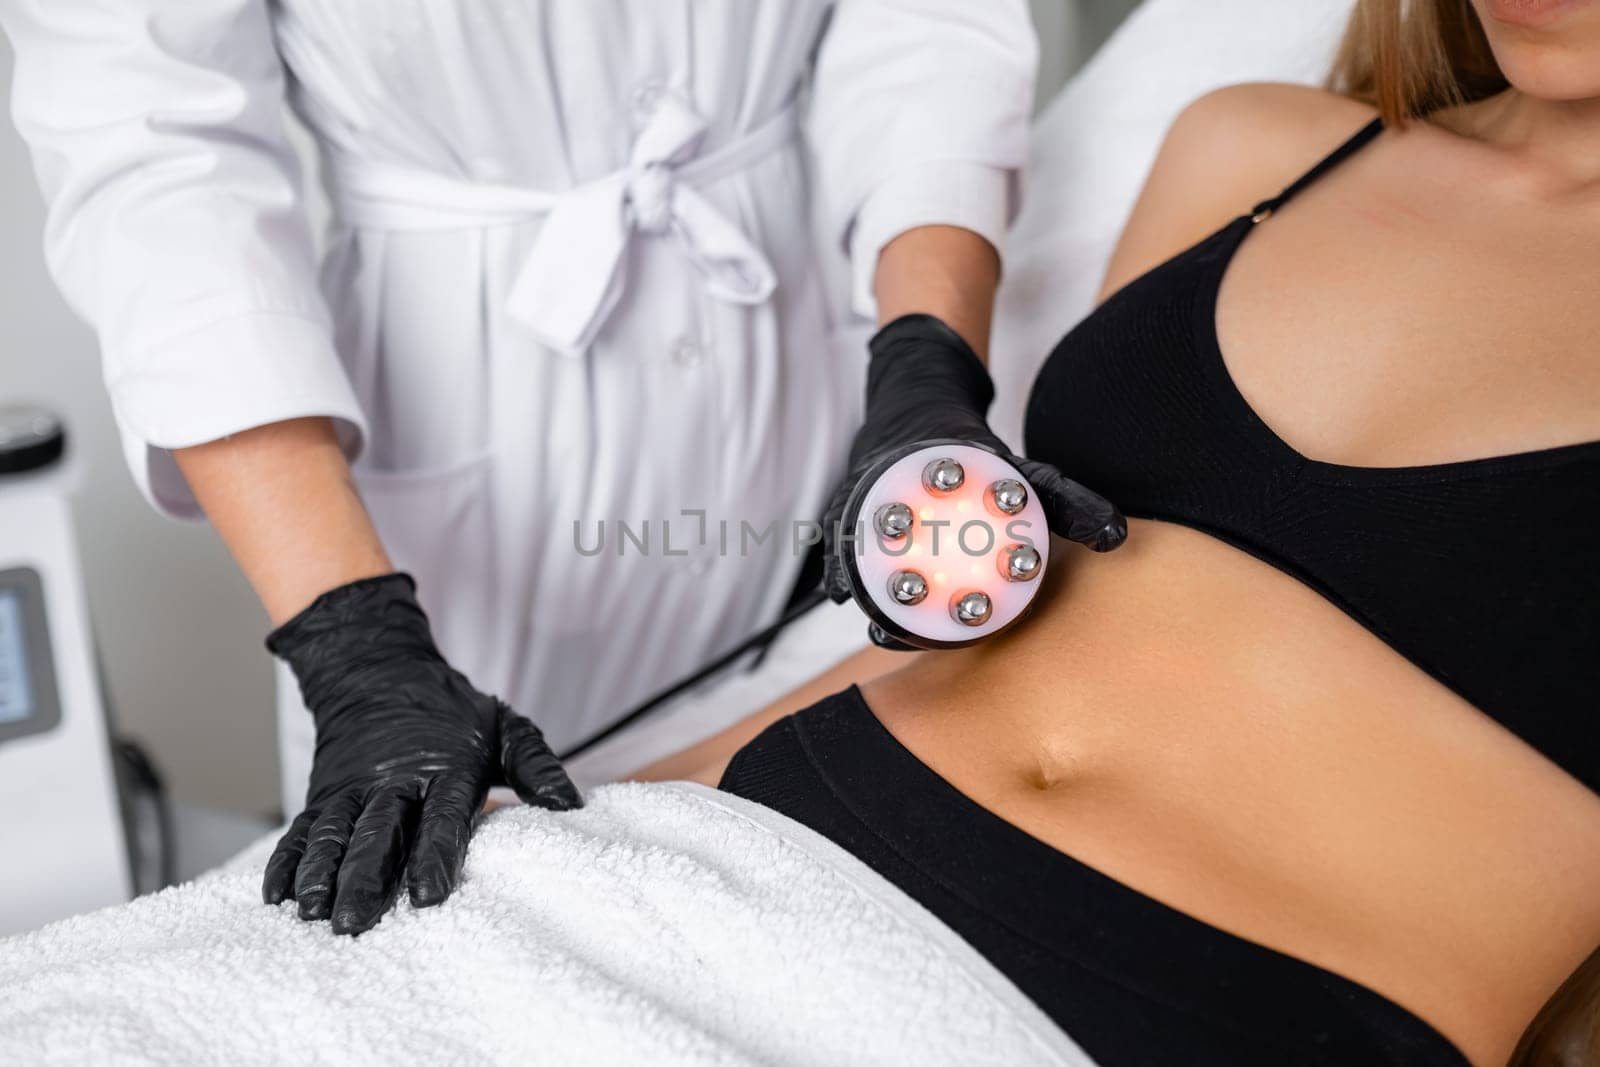 Belly fat reduction is the focus as a young woman undergoes RF body cavitation lifting at the beauty salon.